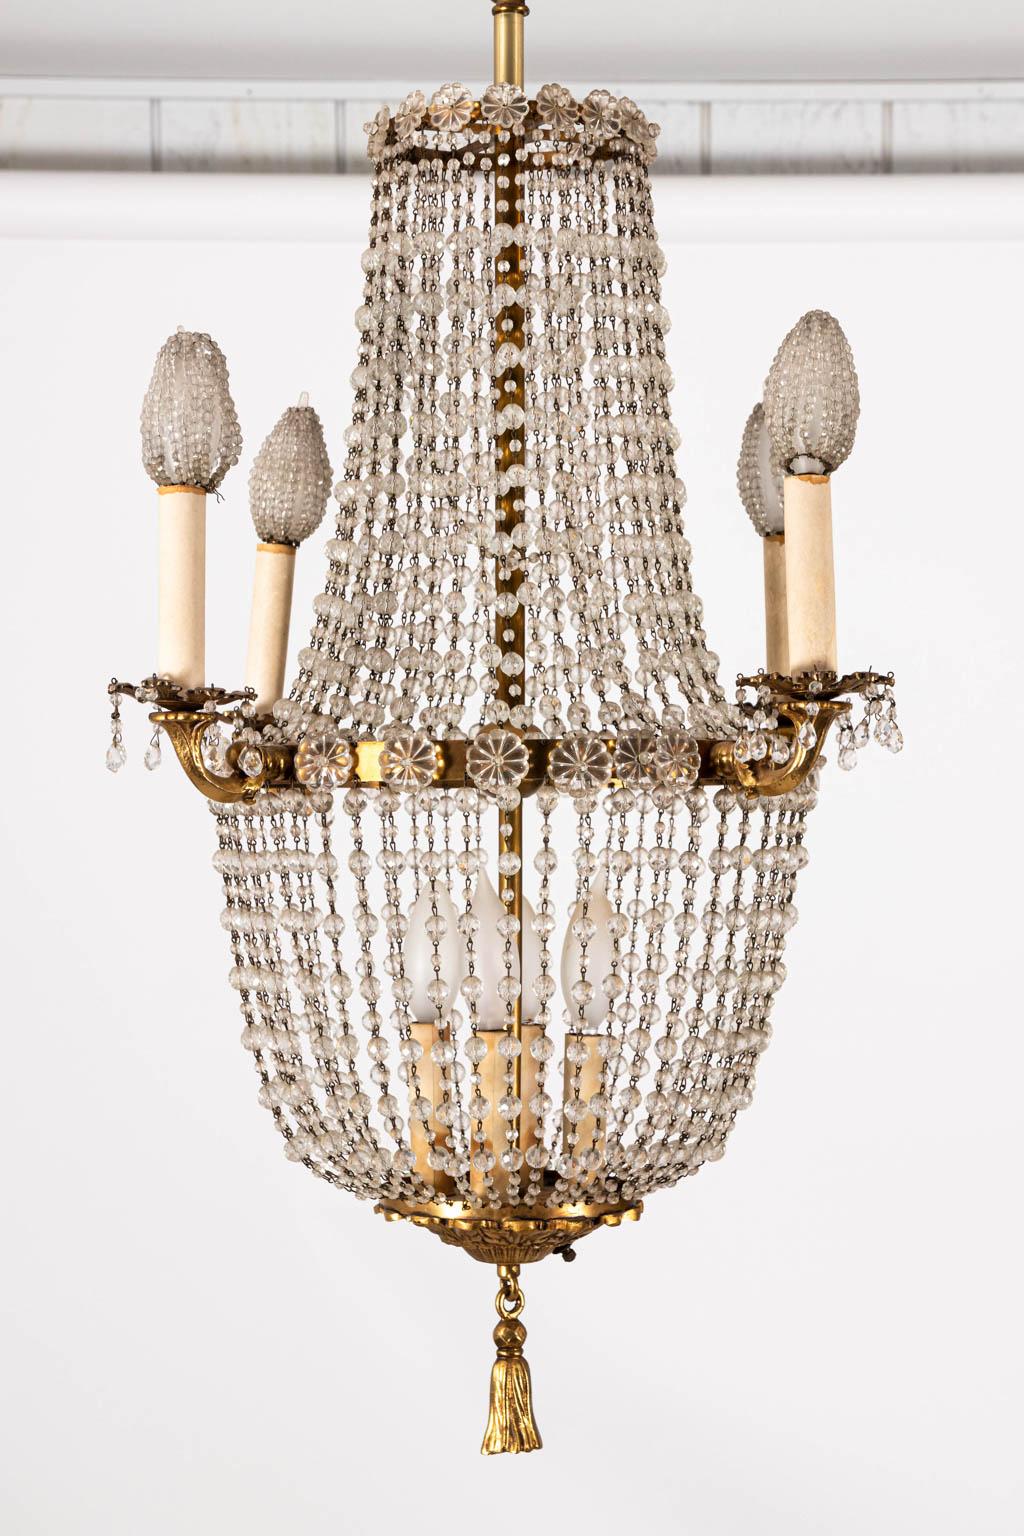 French style crystal beaded chandelier with four external arms and three internal lights inside the Brass basket frame, circa 1960s. Please note of wear consistent with age, and need to be rewired. Made in the United States. Shades not included.